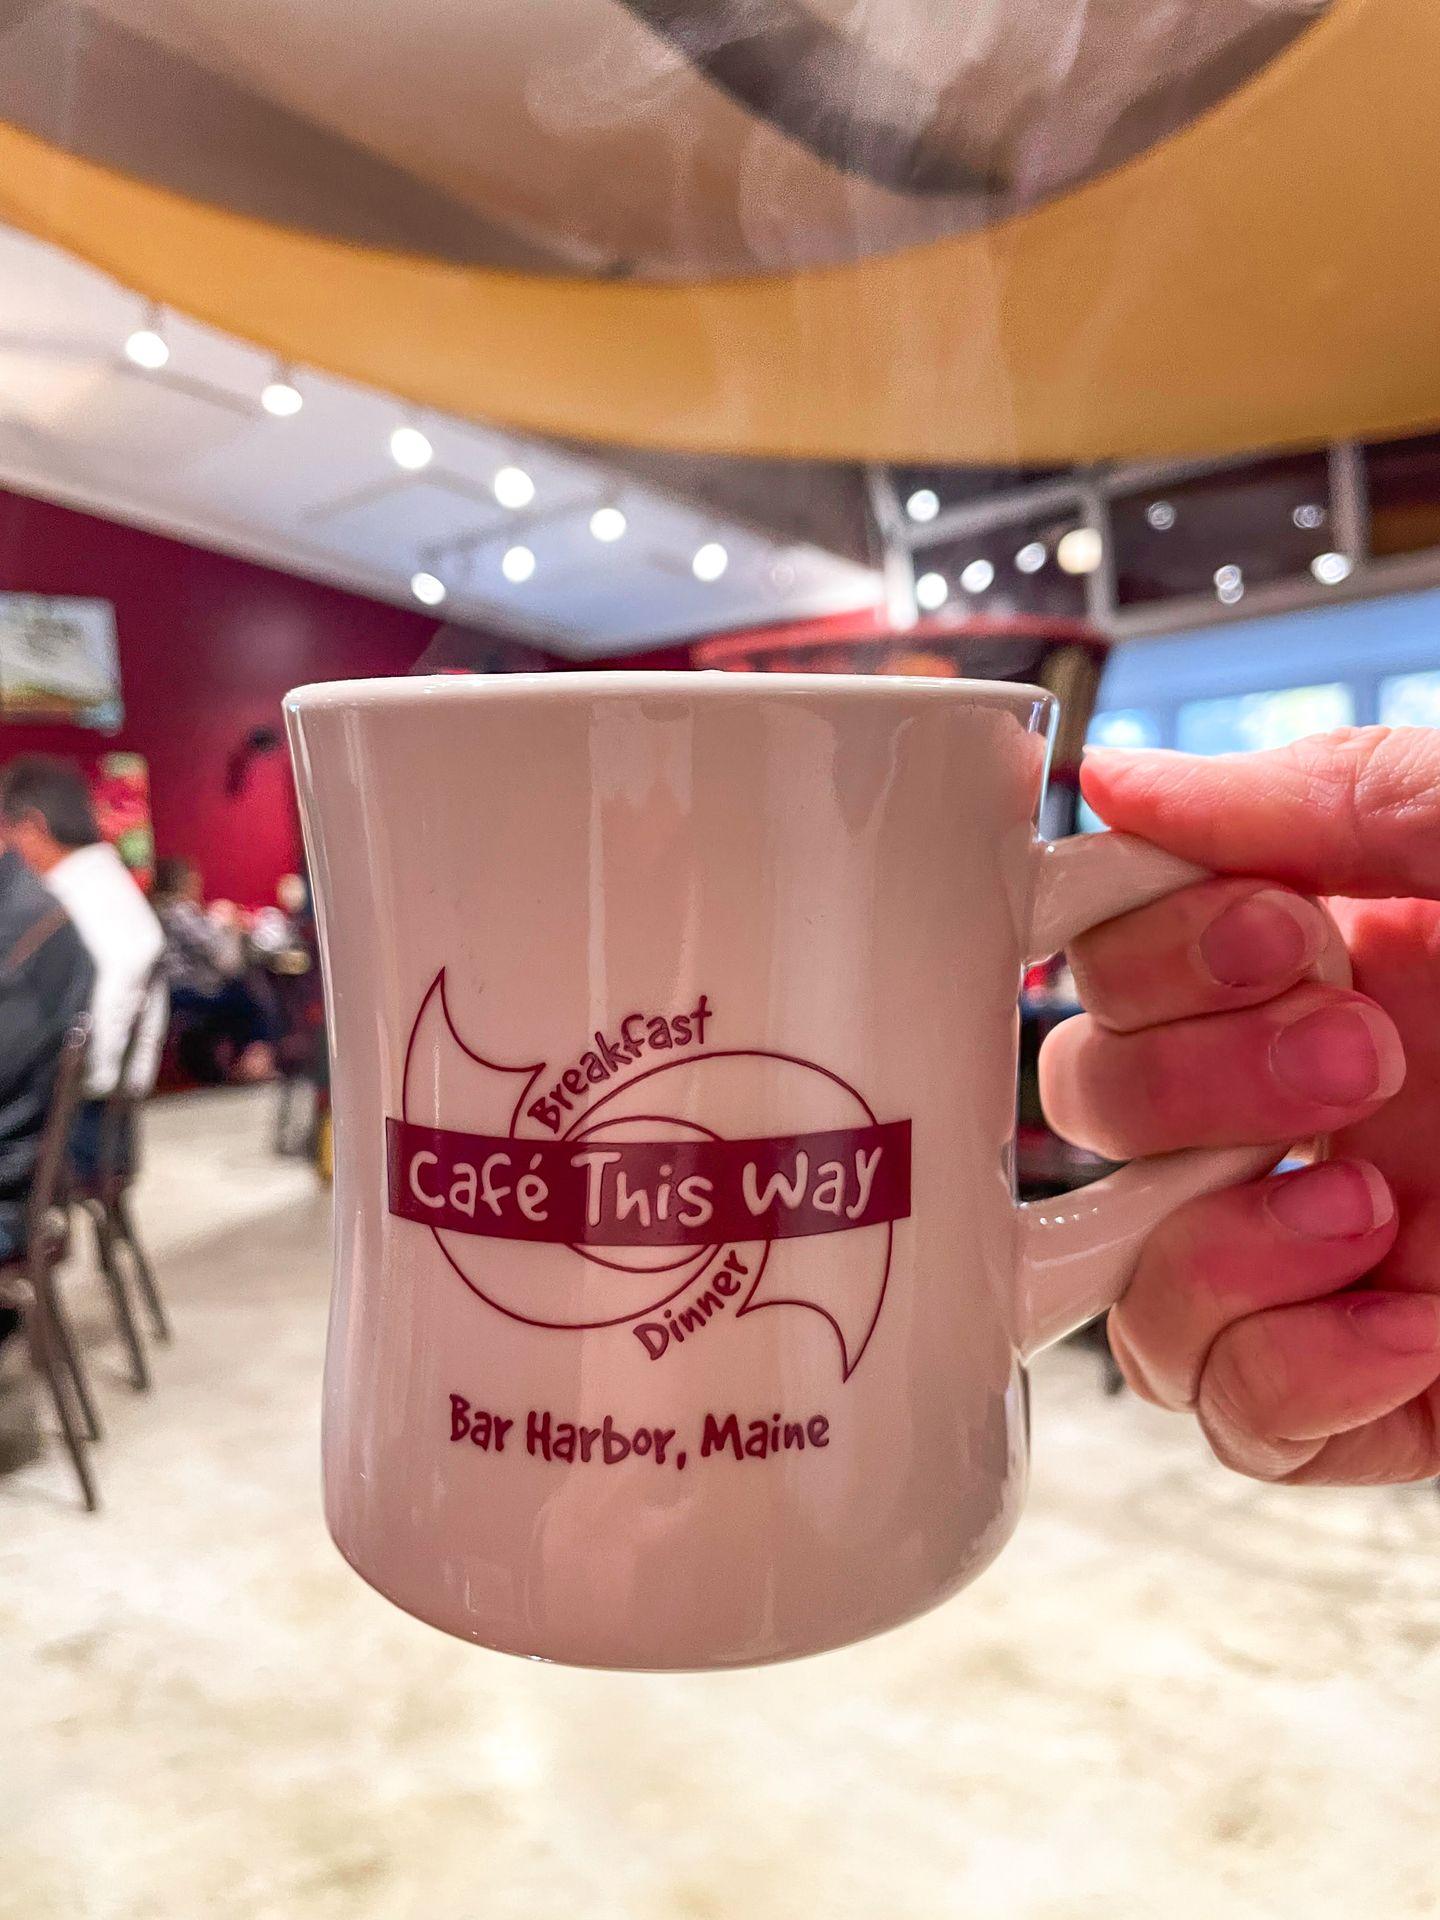 Holding up a mug that reads "Cafe This Way" inside the restaurant.